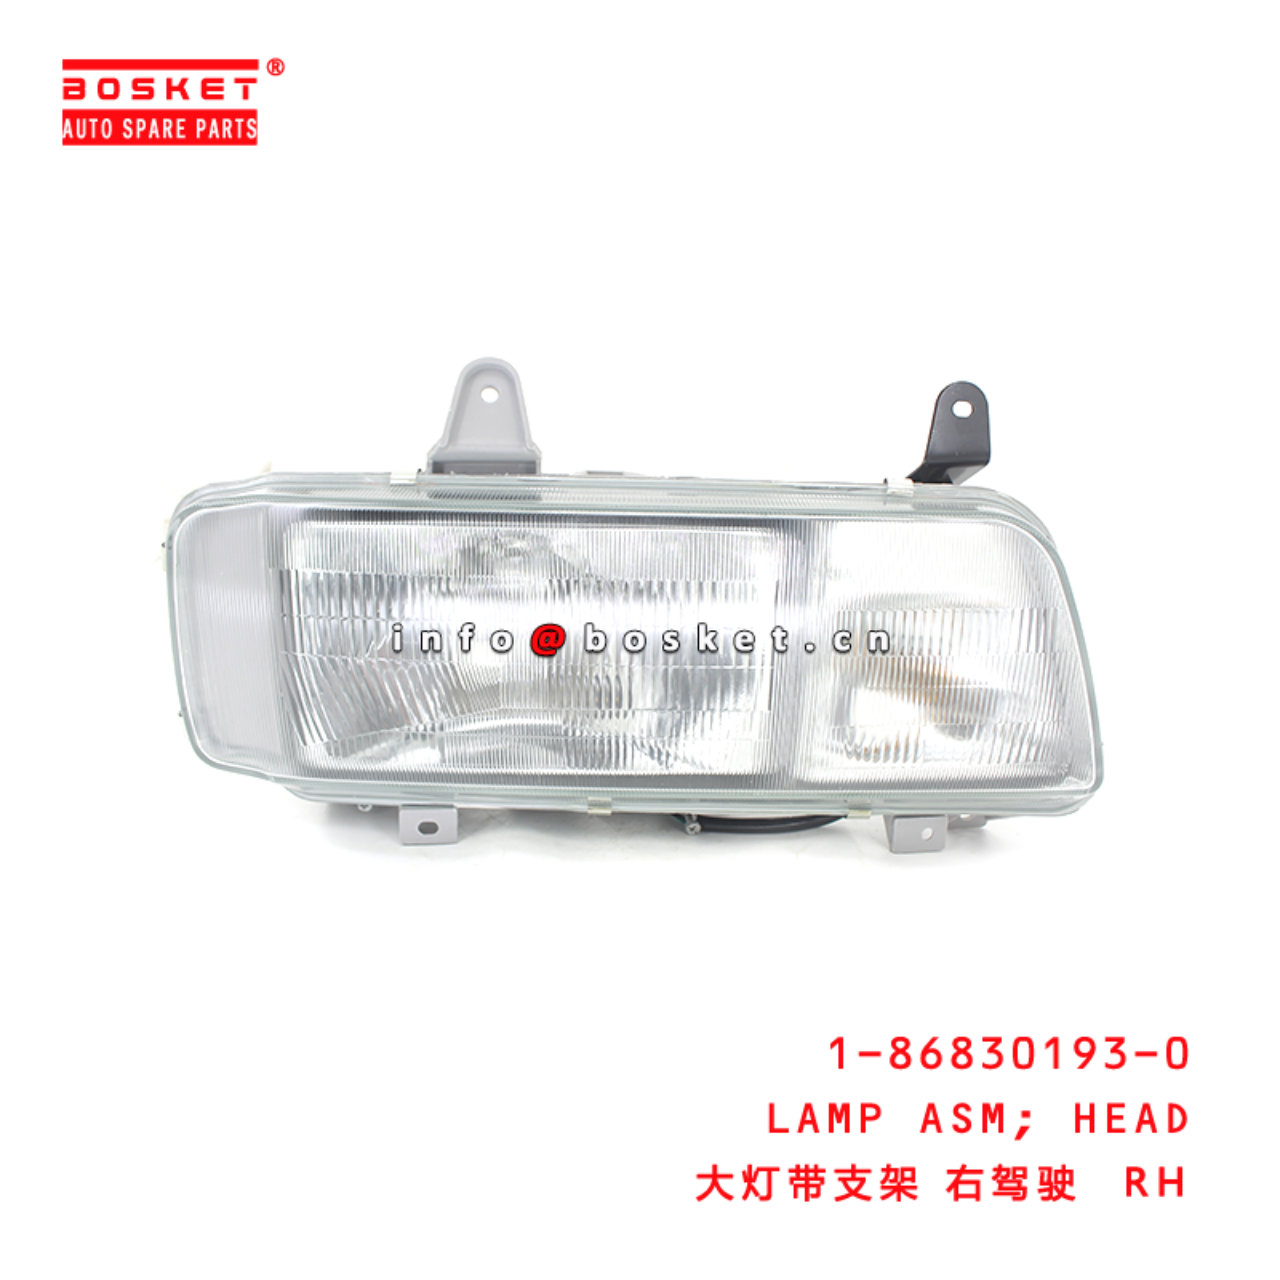 1-86830193-0 Head Lamp Assembly suitable for ISUZU FVR 1868301930